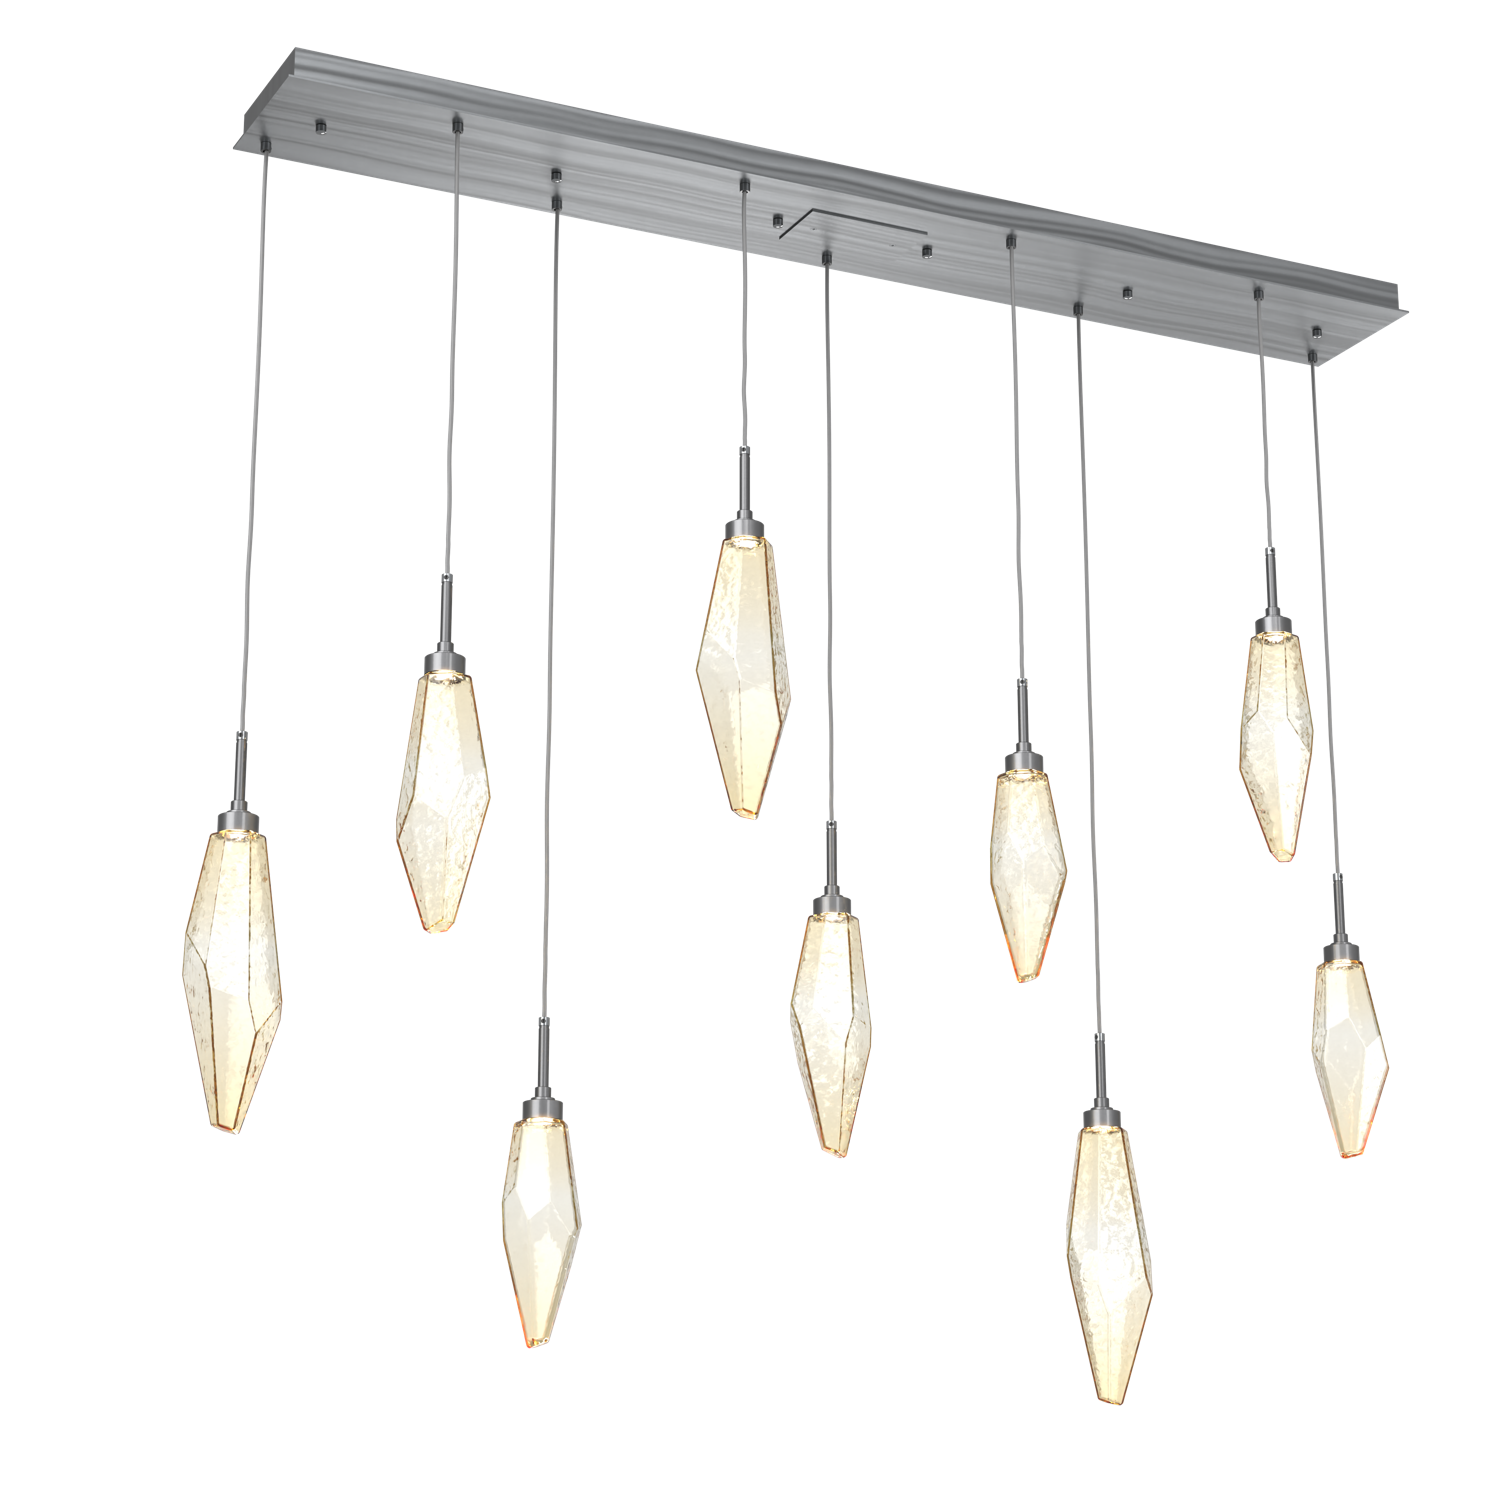 PLB0050-09-GM-CA-Hammerton-Studio-Rock-Crystal-9-light-linear-pendant-chandelier-with-gunmetal-finish-and-chilled-amber-blown-glass-shades-and-LED-lamping